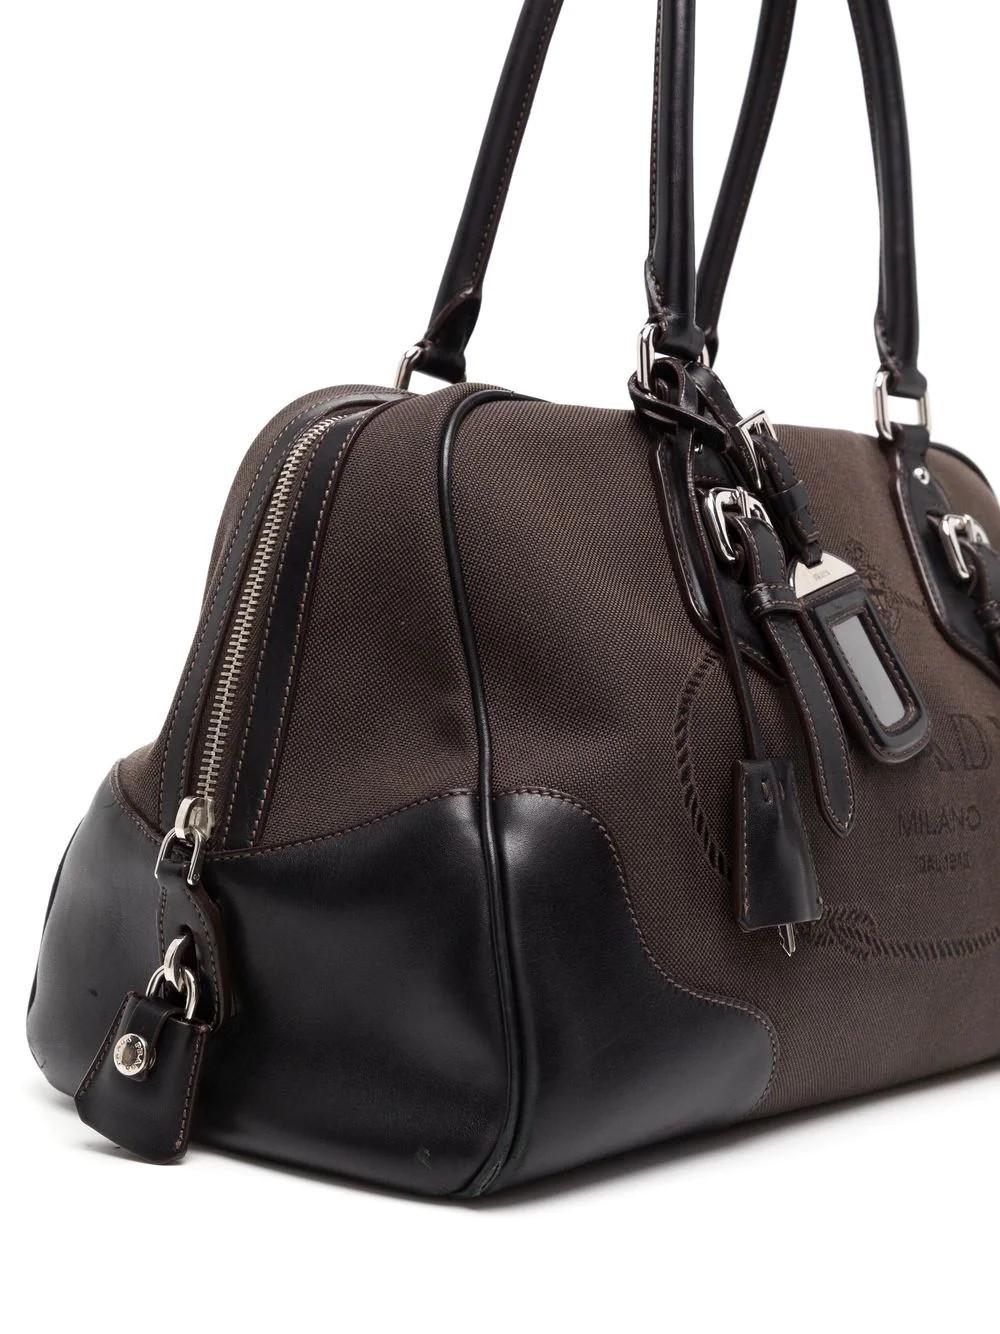 A superb Prada bowling handbag in brown leather and canvas, hardware in silver metal, and double handle in brown leather allowing the bag to be worn in the hand or on the shoulder. This bag also features the signature Prada Milano logo at the